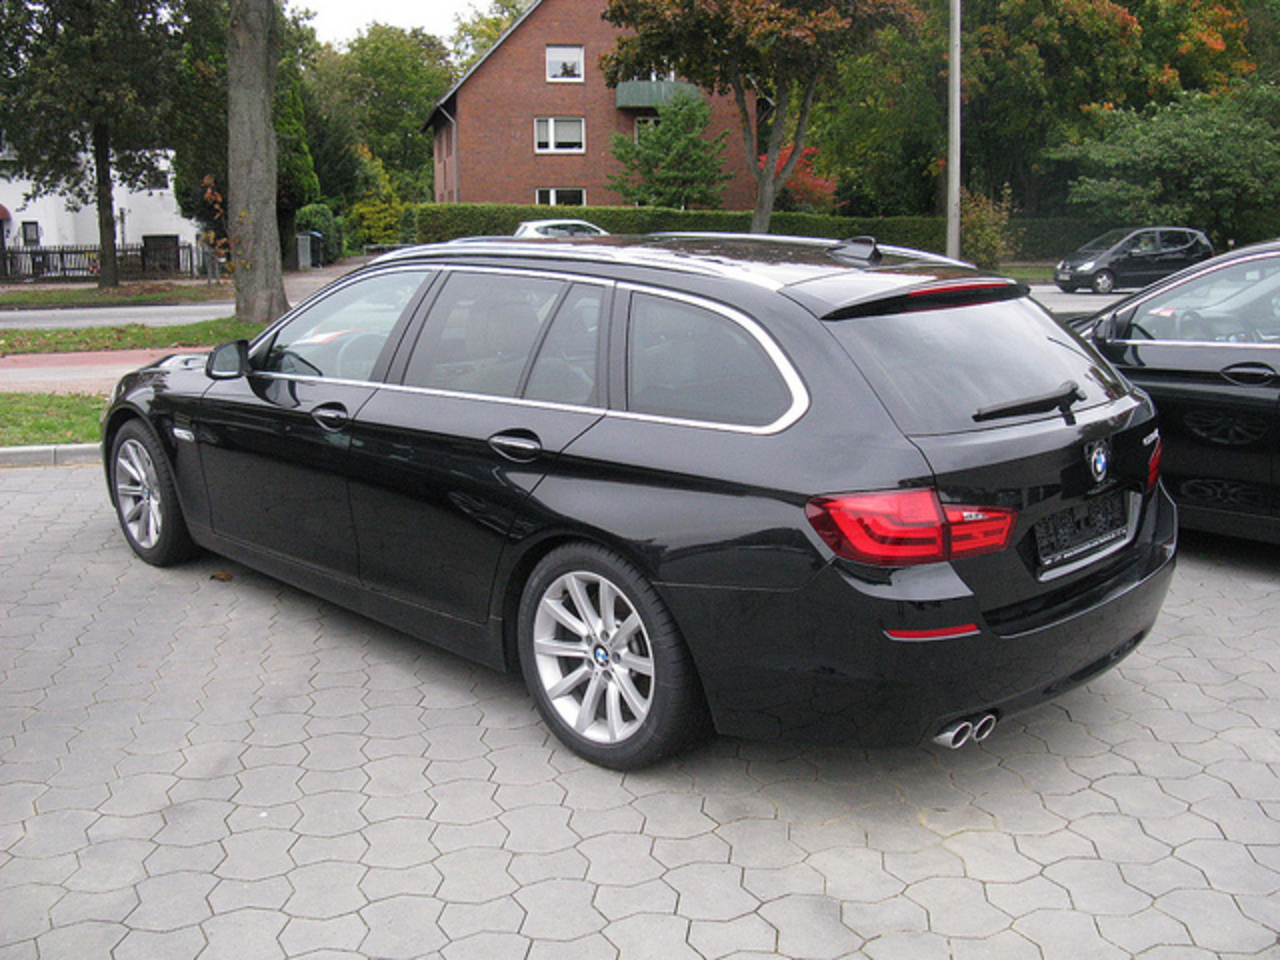 BMW 520d Touring F11 | Flickr - Photo Sharing!